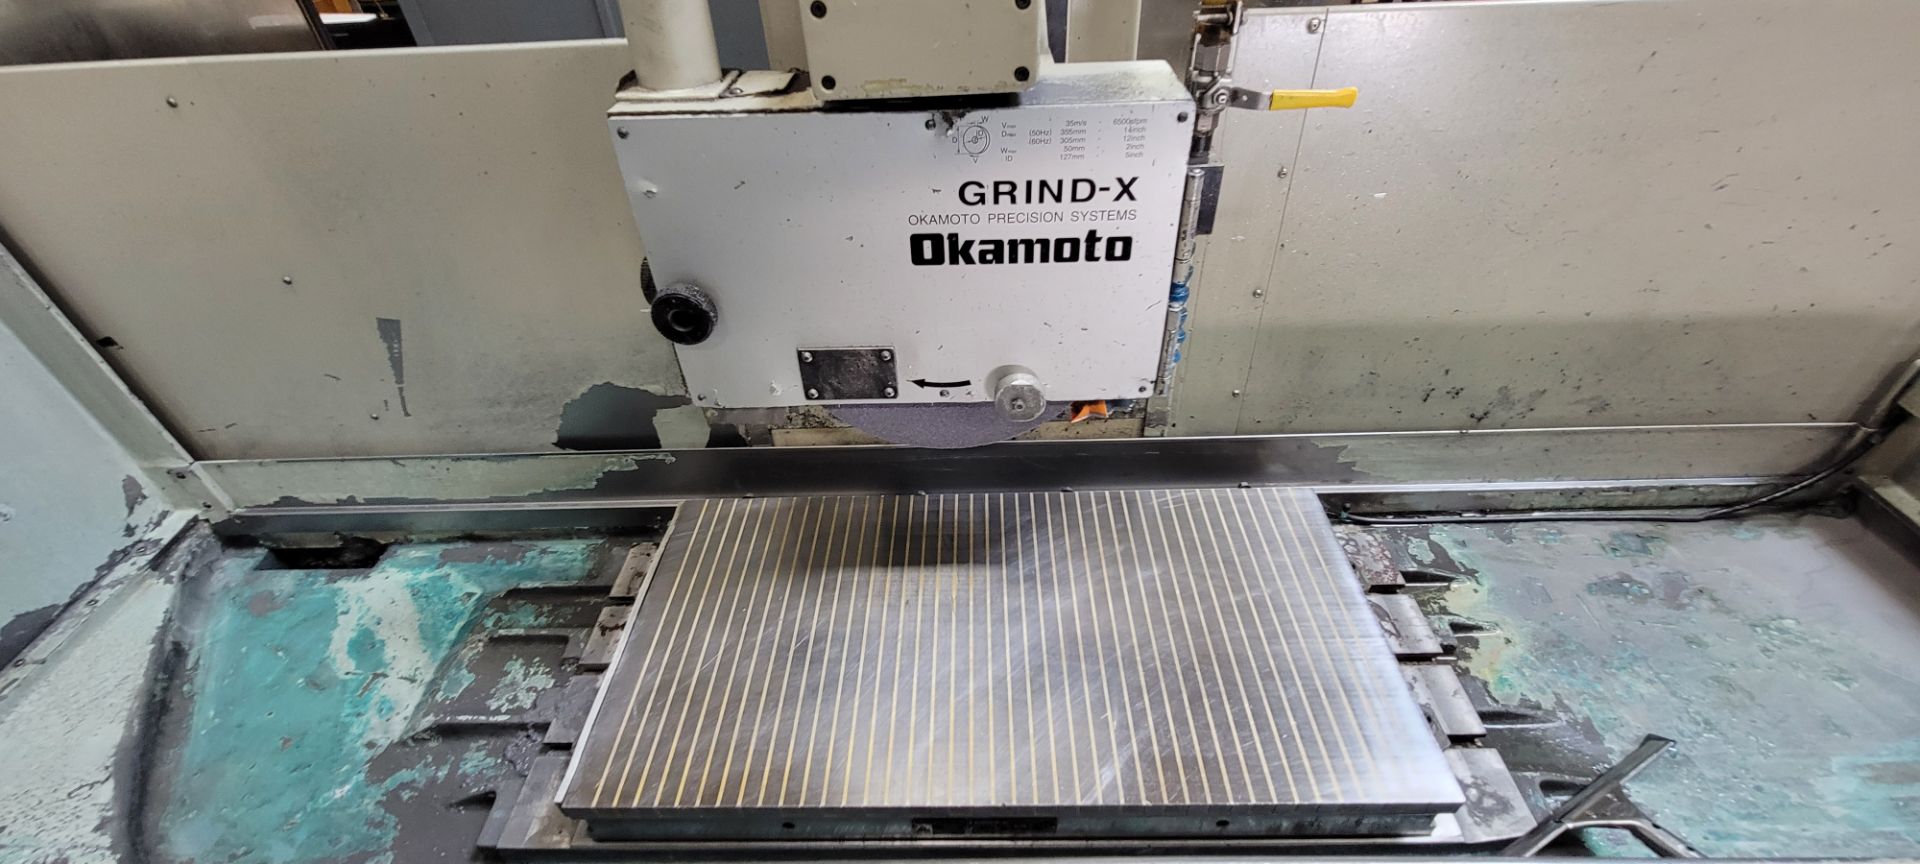 Okamoto ACC-1632D "Grind-X" 16" x 32" Automatic Hydraulic Surface Grinder - Image 3 of 9